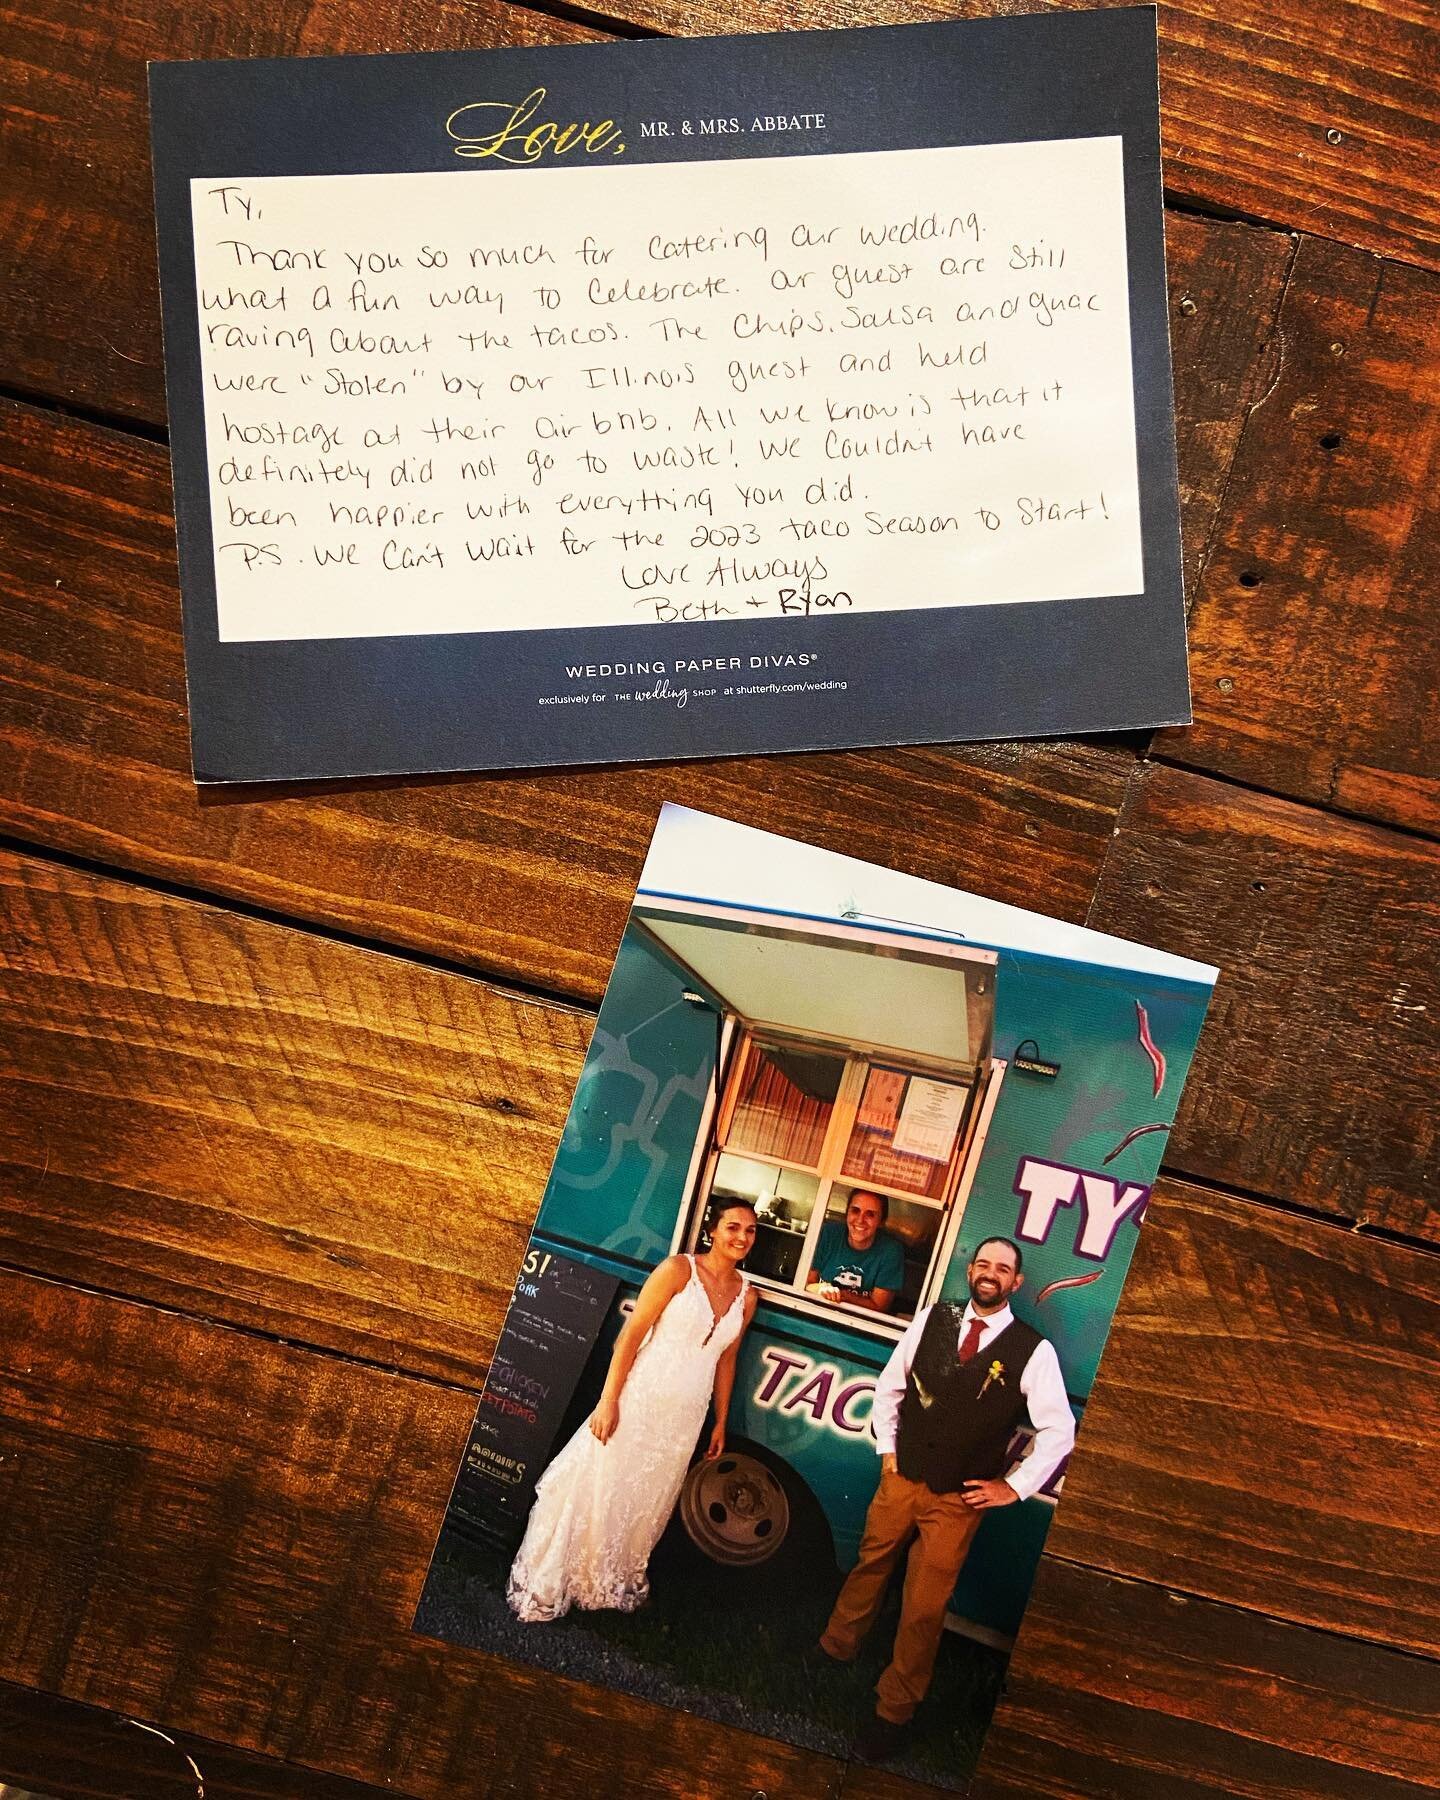 Beth and Ryan have been some of our biggest supporters, so when they were planning their special day, we were absolutely thrilled to be a part of it!
Thank you for the kind words, I&rsquo;m sure we&rsquo;ll see you next week on opening night! ❤️❤️

W